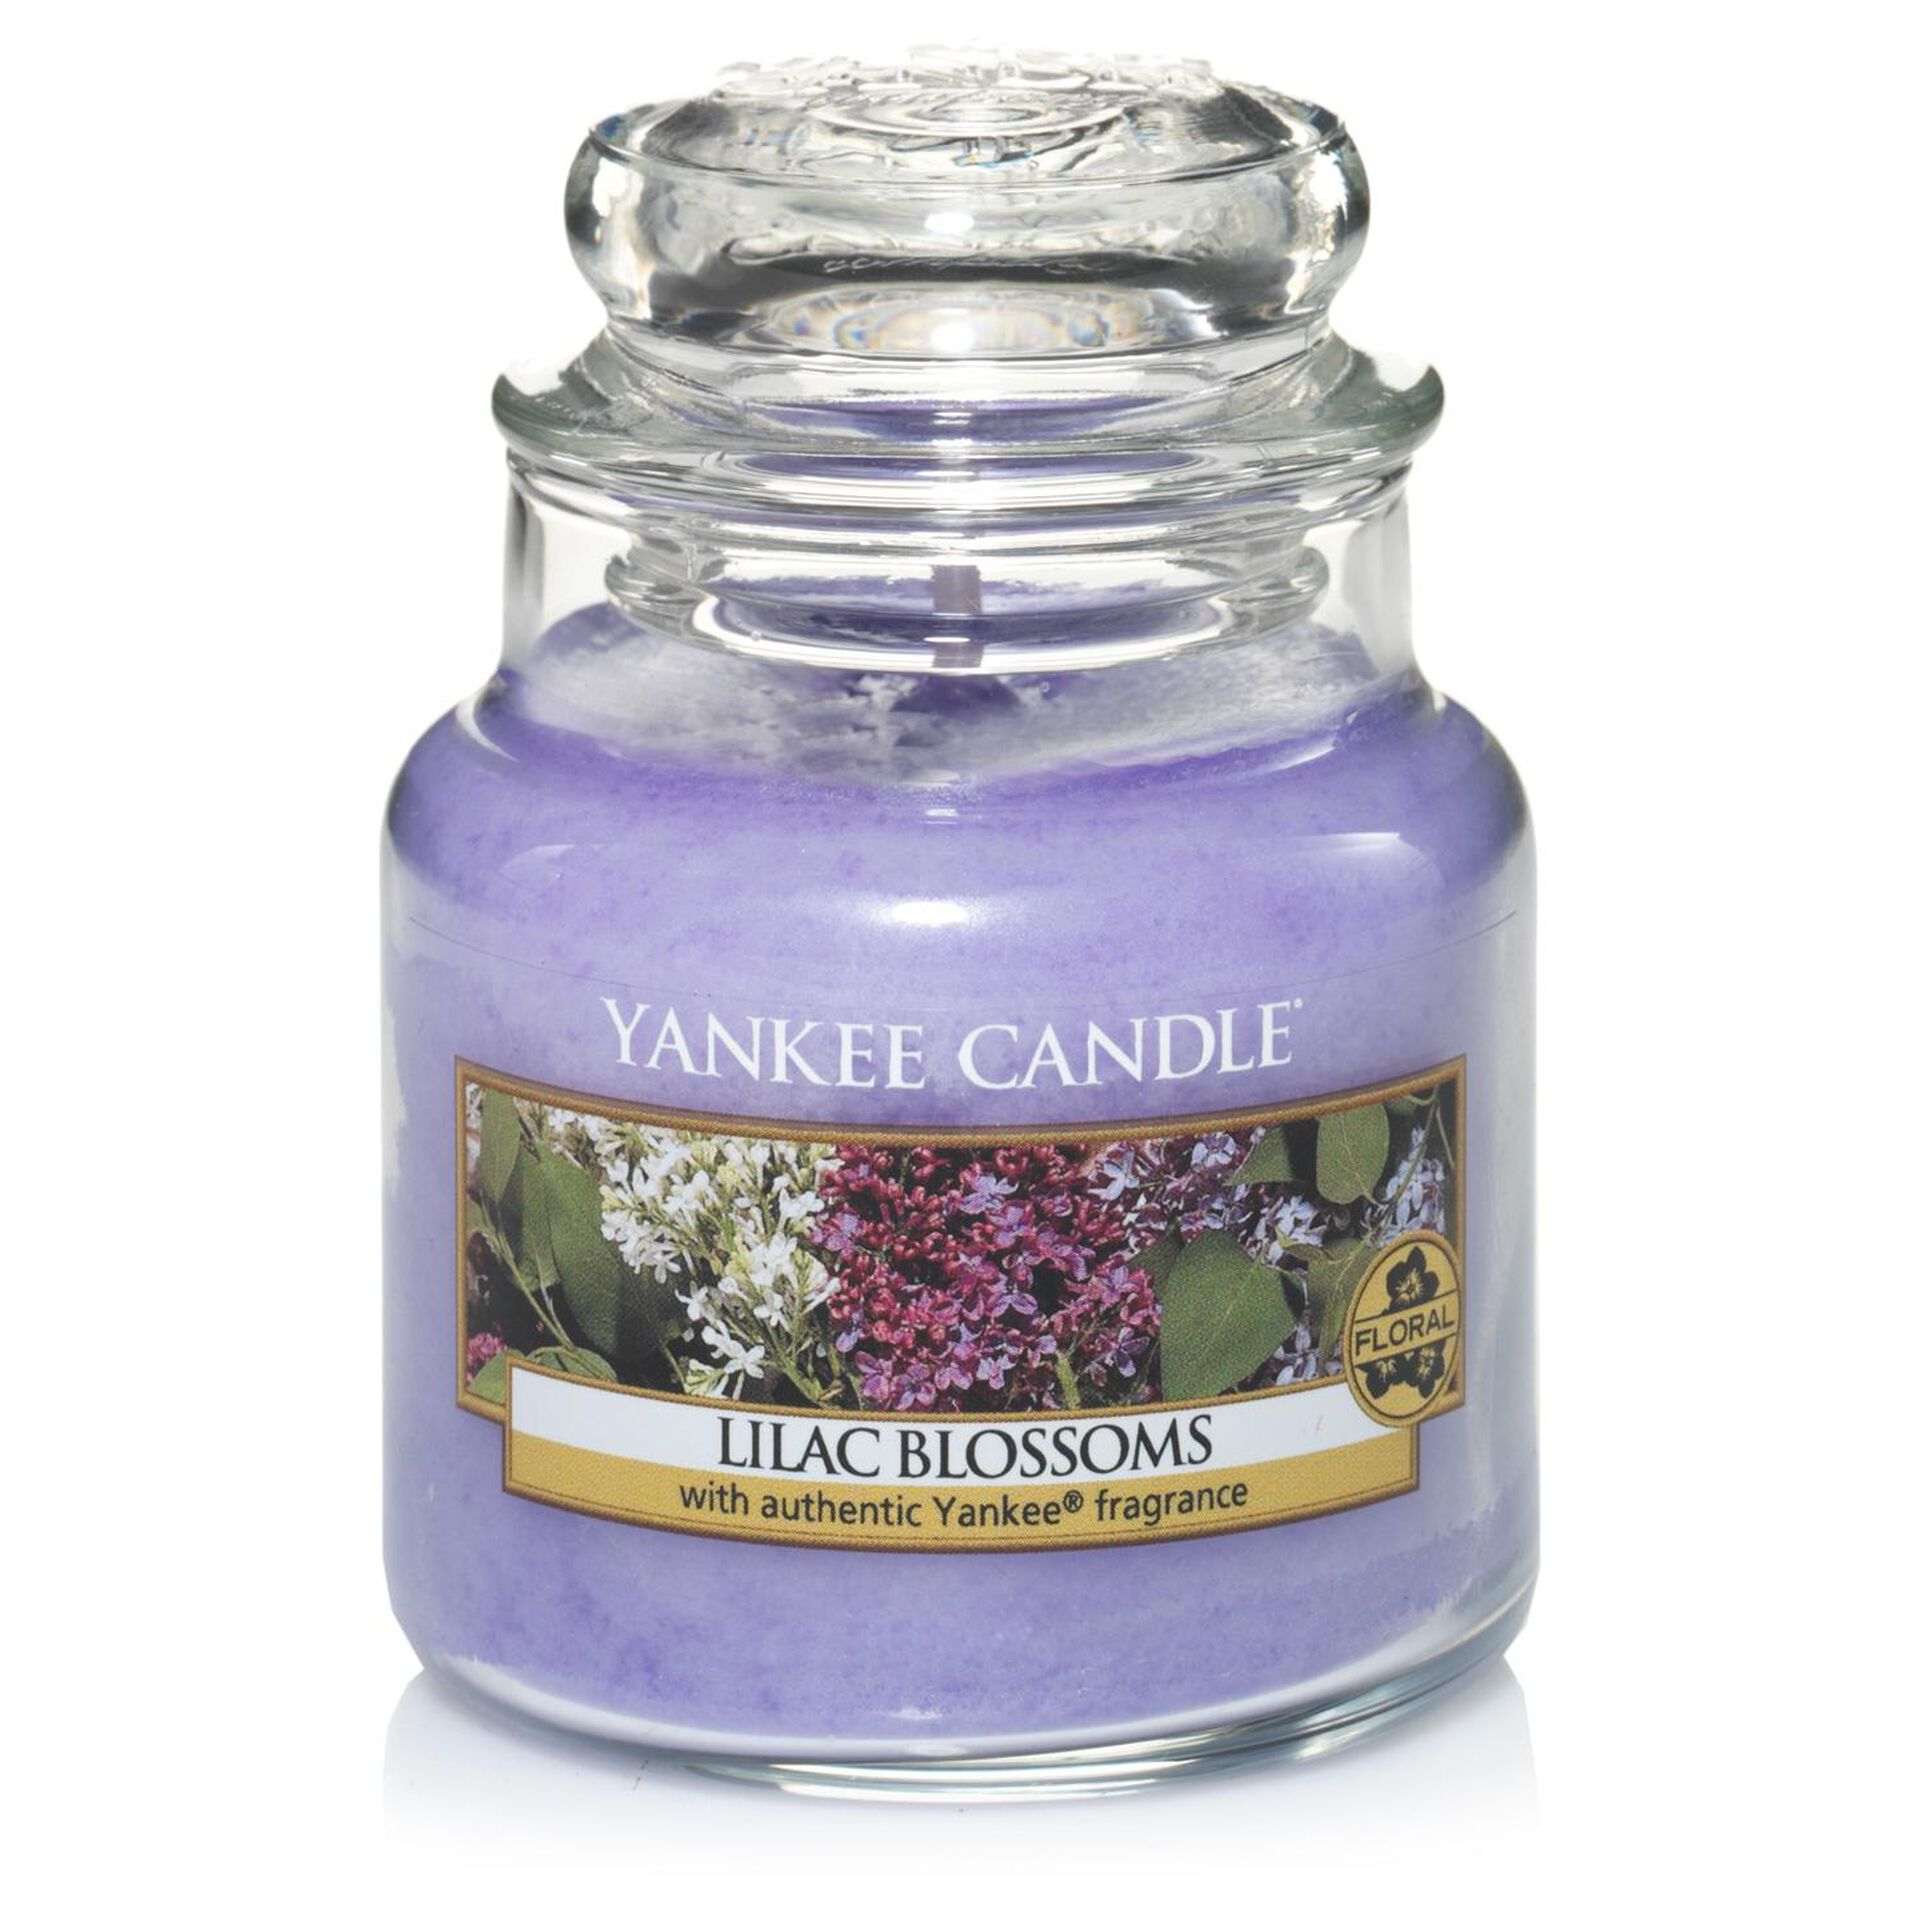 Lilac Blossoms Small Jar Candle by Yankee Candle® - Candles - Hallmark